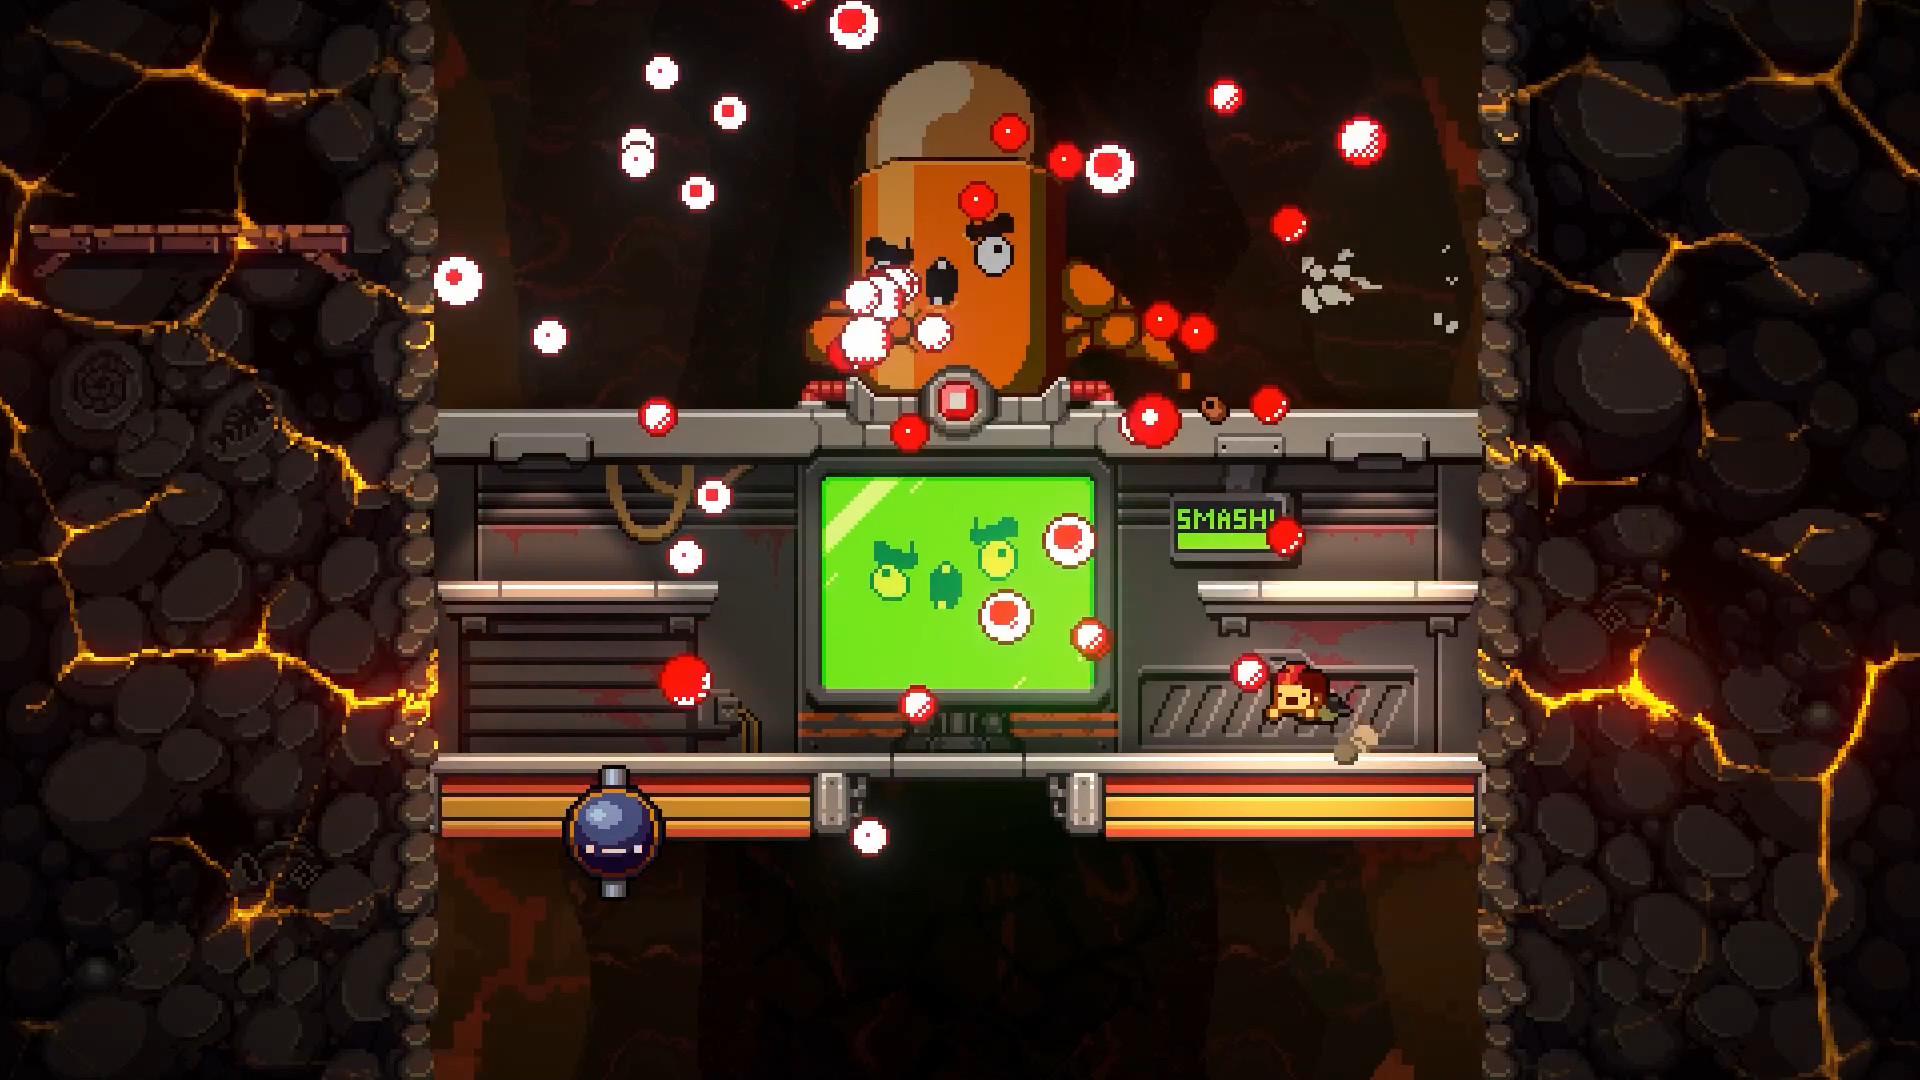 Exit The Gungeon, The Sequel To The Critically-Acclaimed Bullet Hell Platformer Gungeon, Drops For Windows And Nintendo Switch